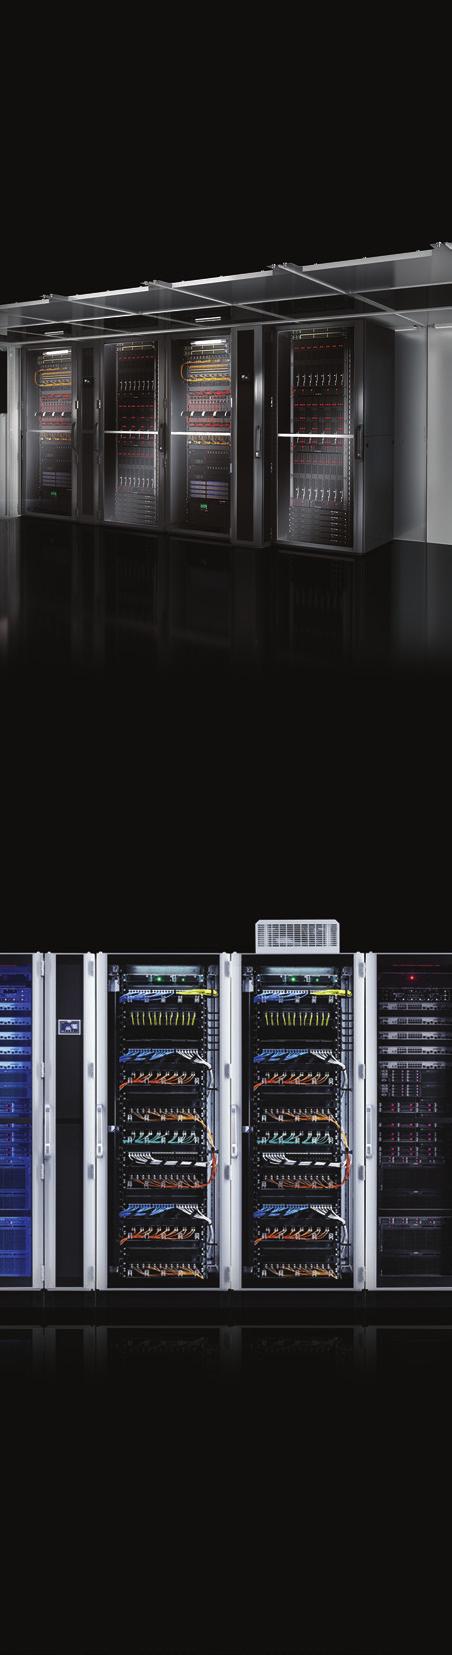 The Future of Edge Choose Rittal For Maximum Flexibility Delivers Maximum Cost-Efficiency Rittal has redefined the standard in Server and Network enclosures with the TS IT modular system, featuring